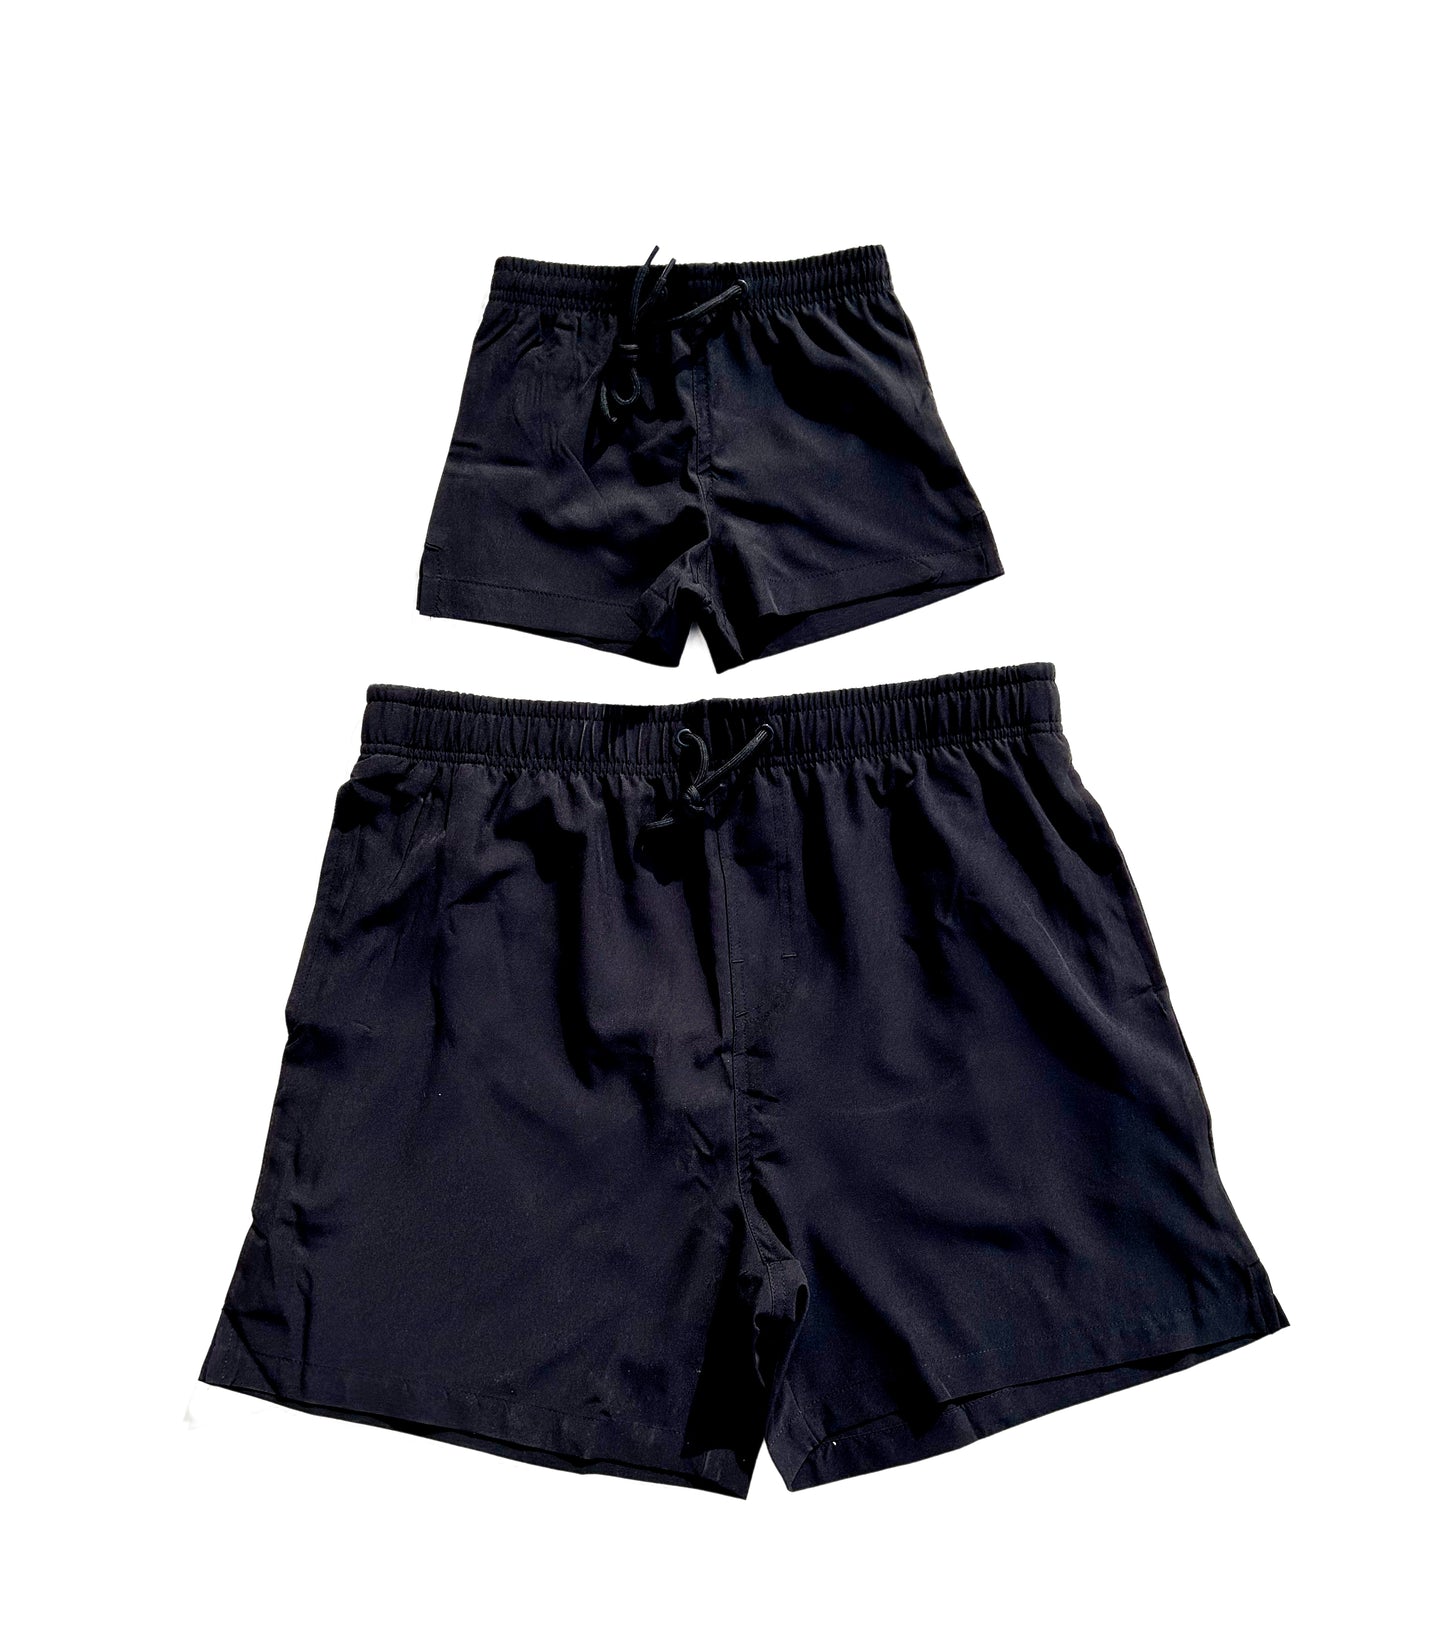 daddy and son matching black swim shorts